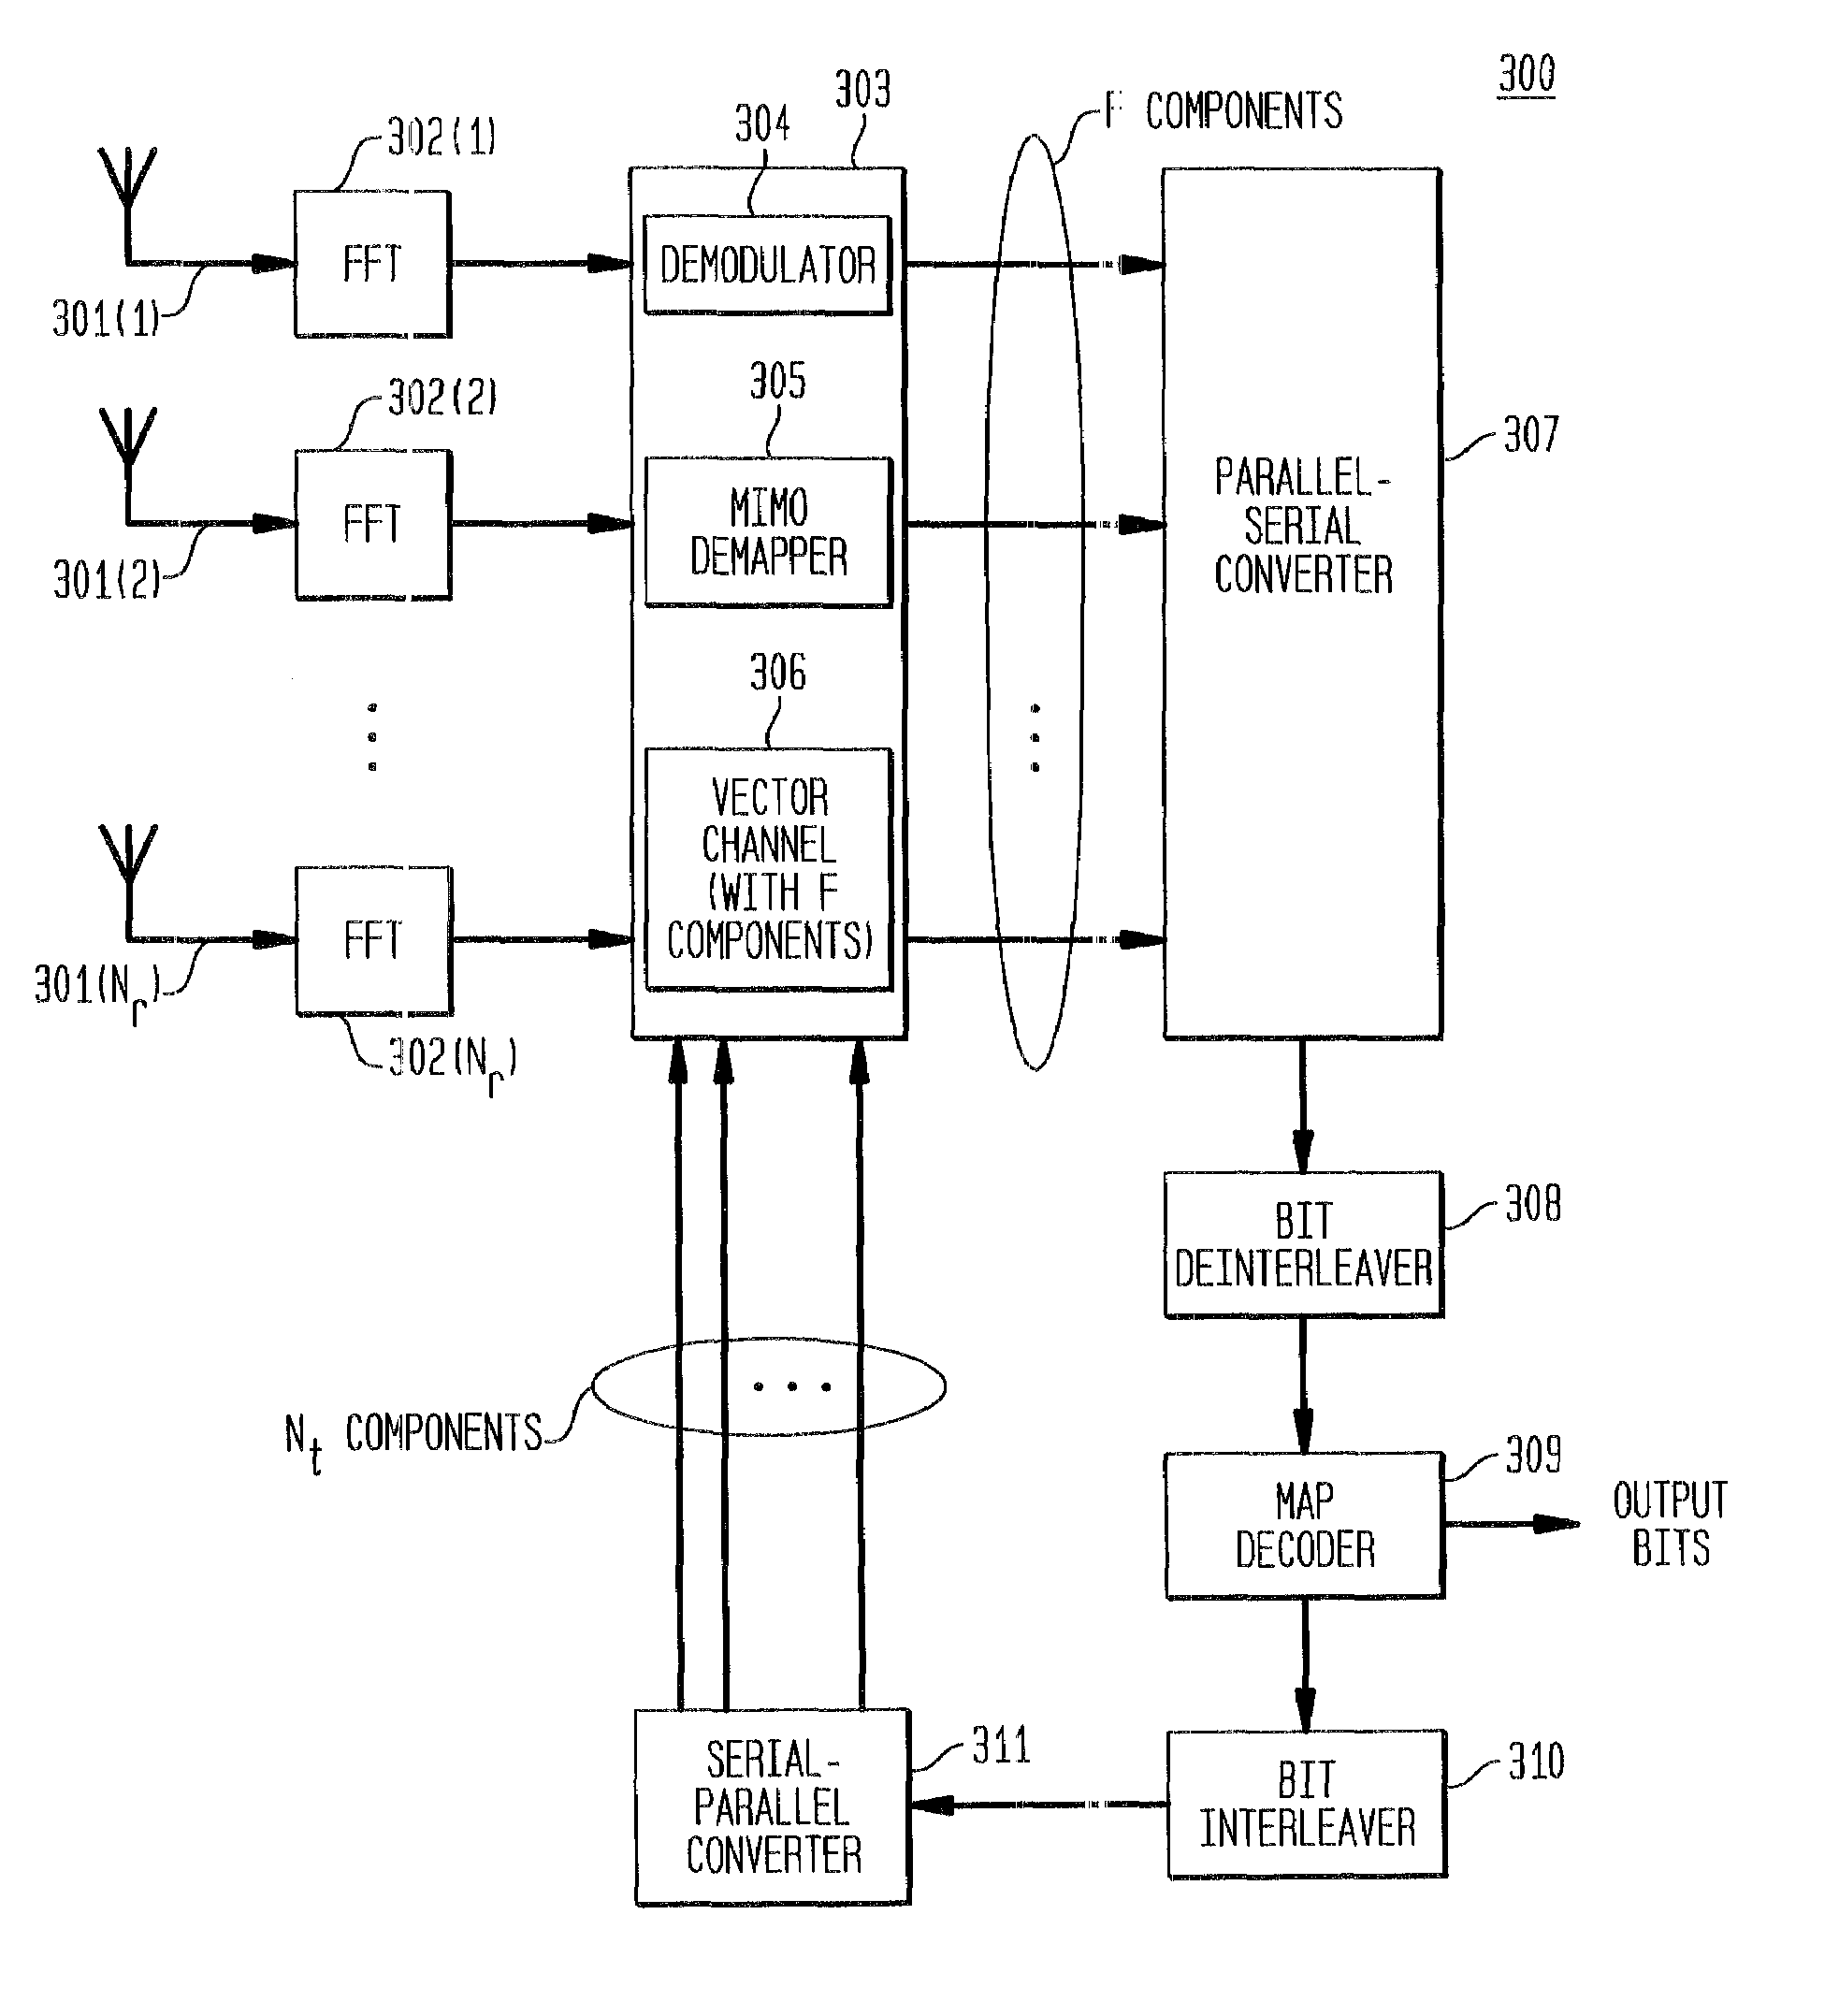 Space-time bit-interleaved coded modulation for wideband transmission